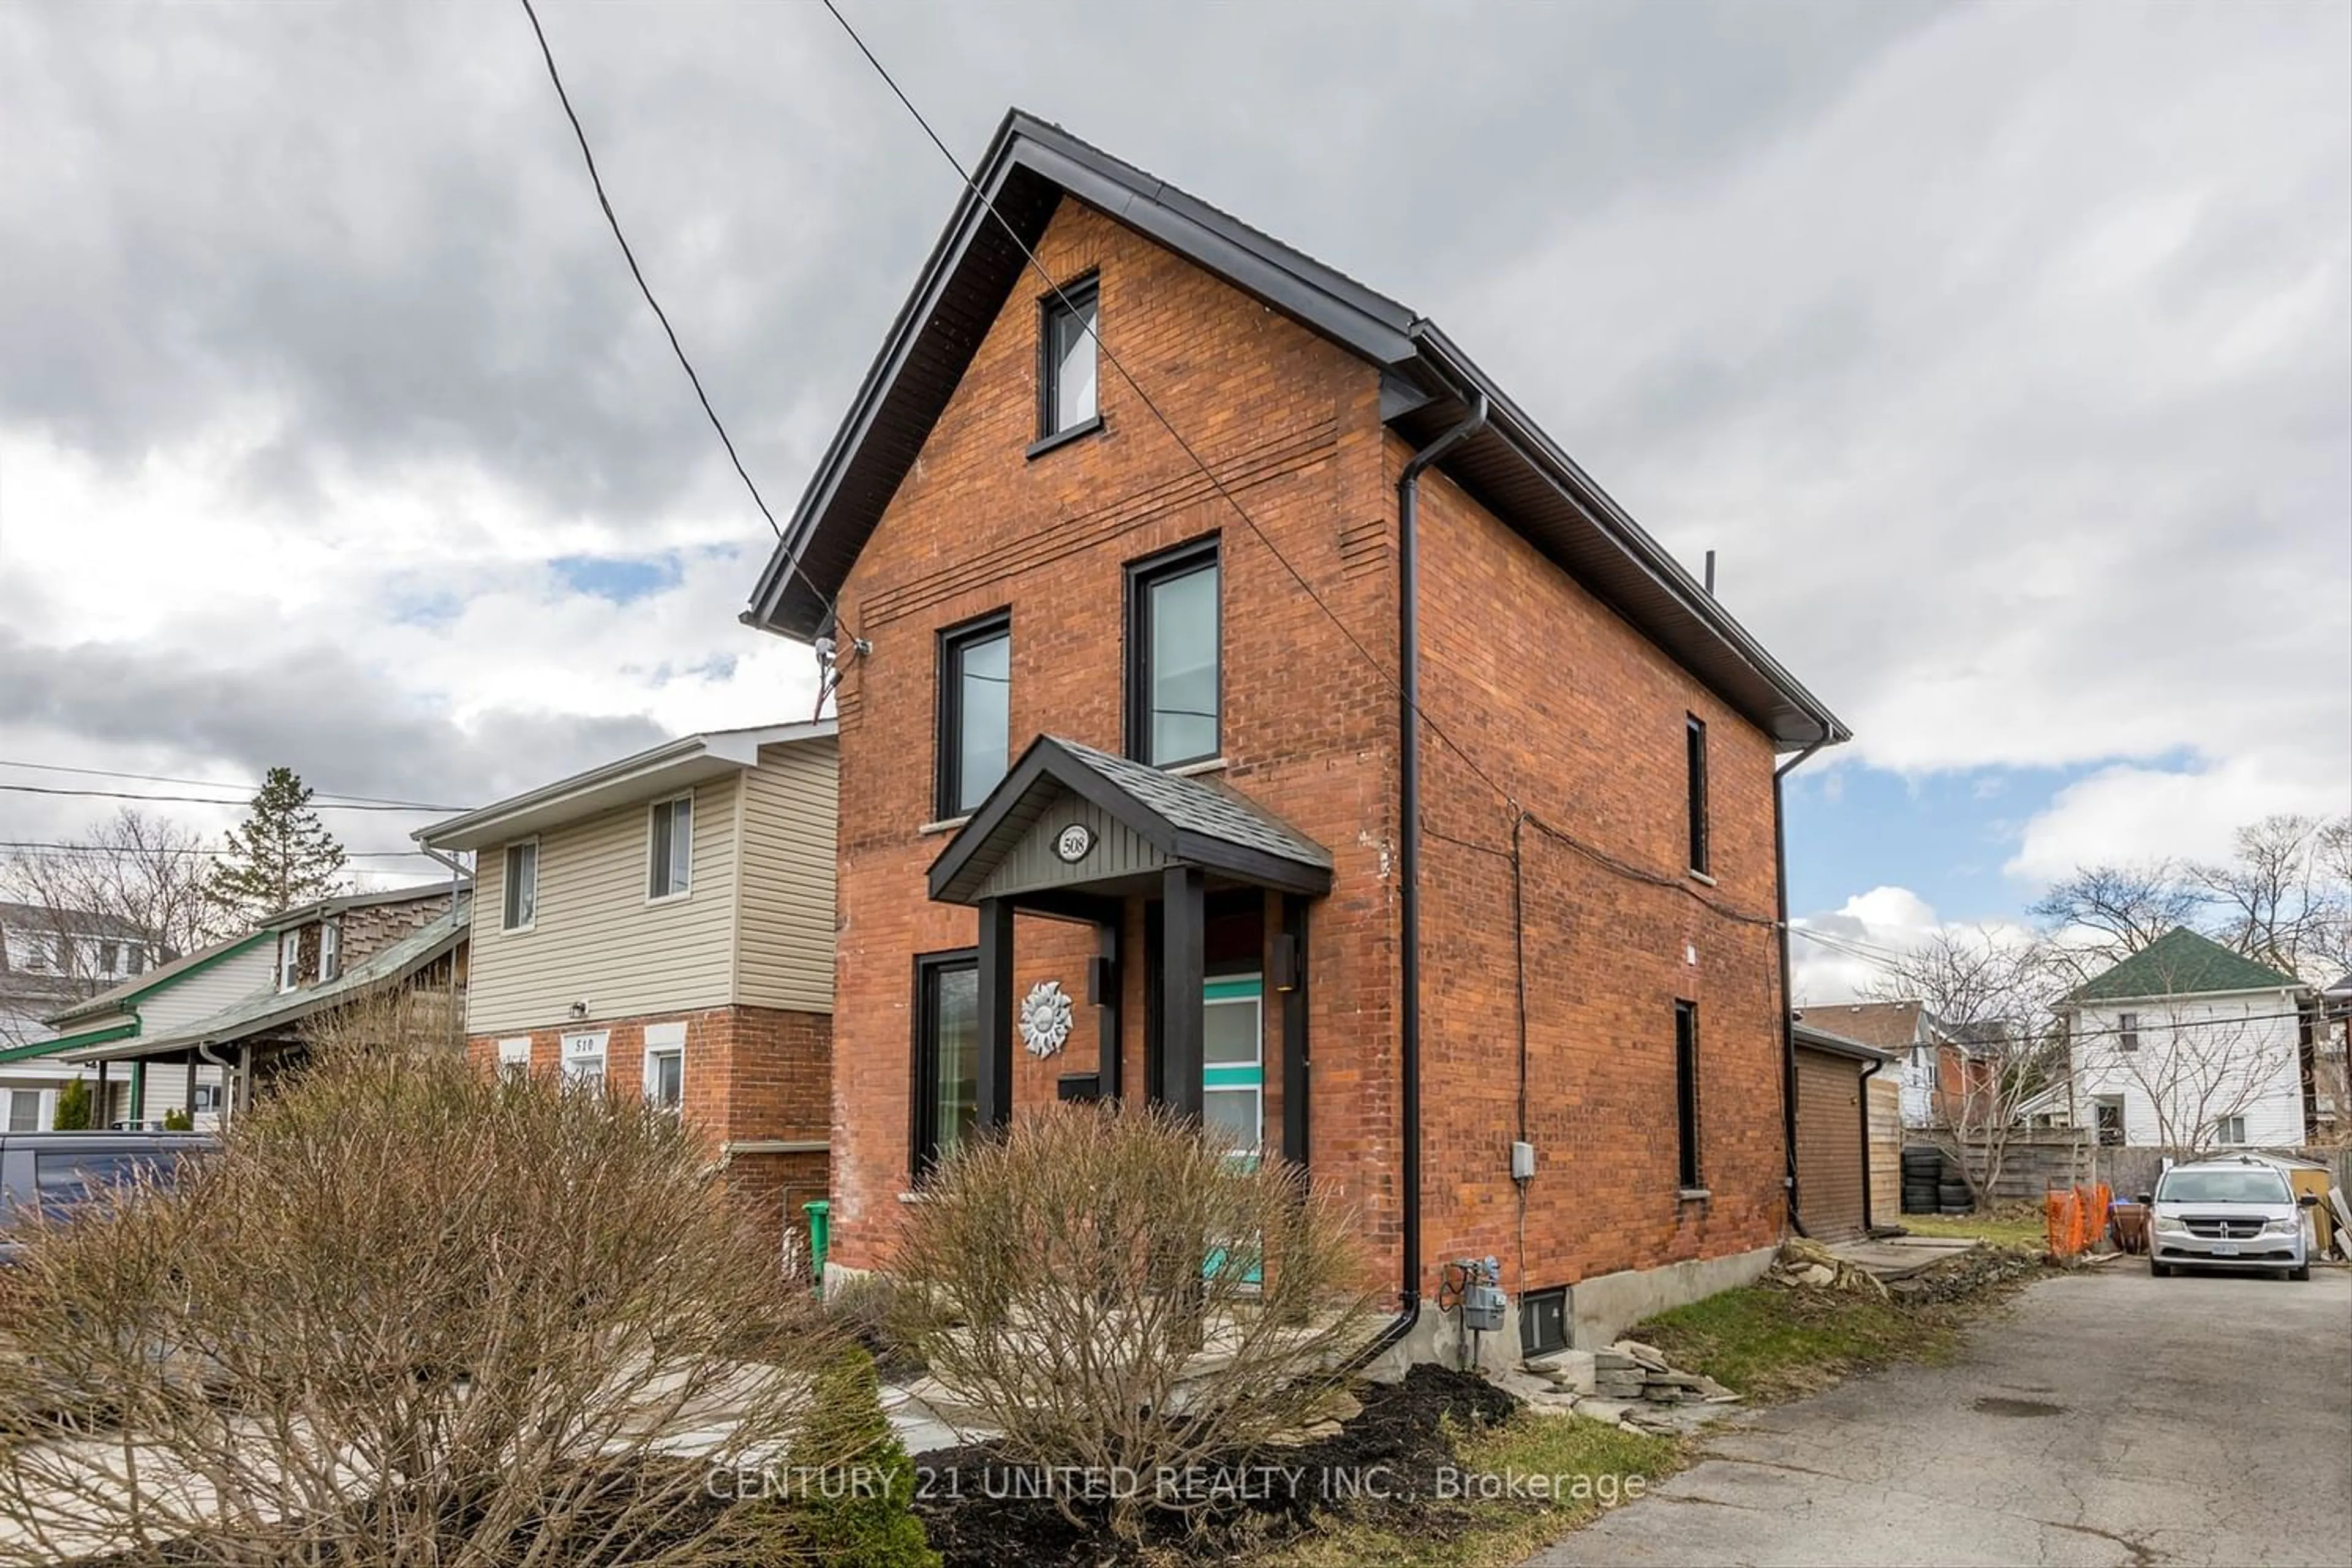 Home with brick exterior material for 508 Sherbrooke St, Peterborough Ontario K9J 2P3